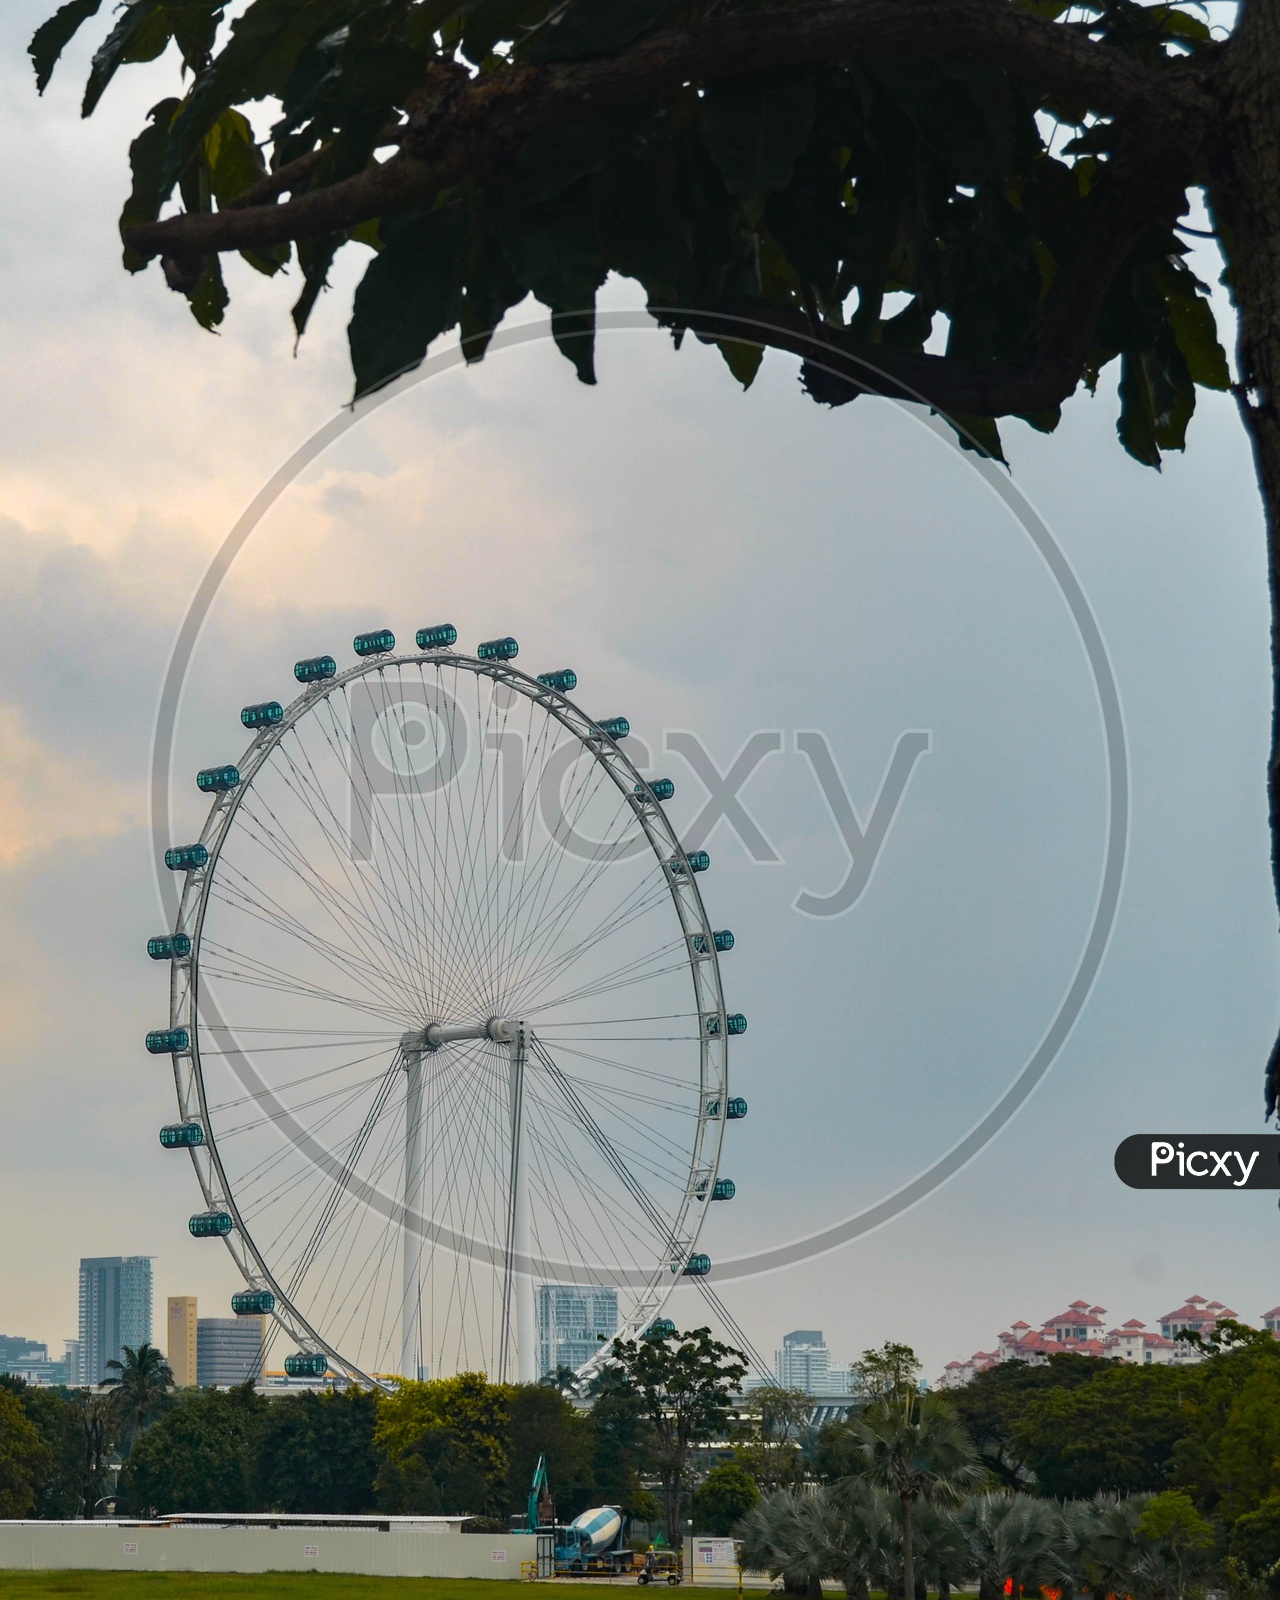 Singapore flyer from far with a tree in the frame